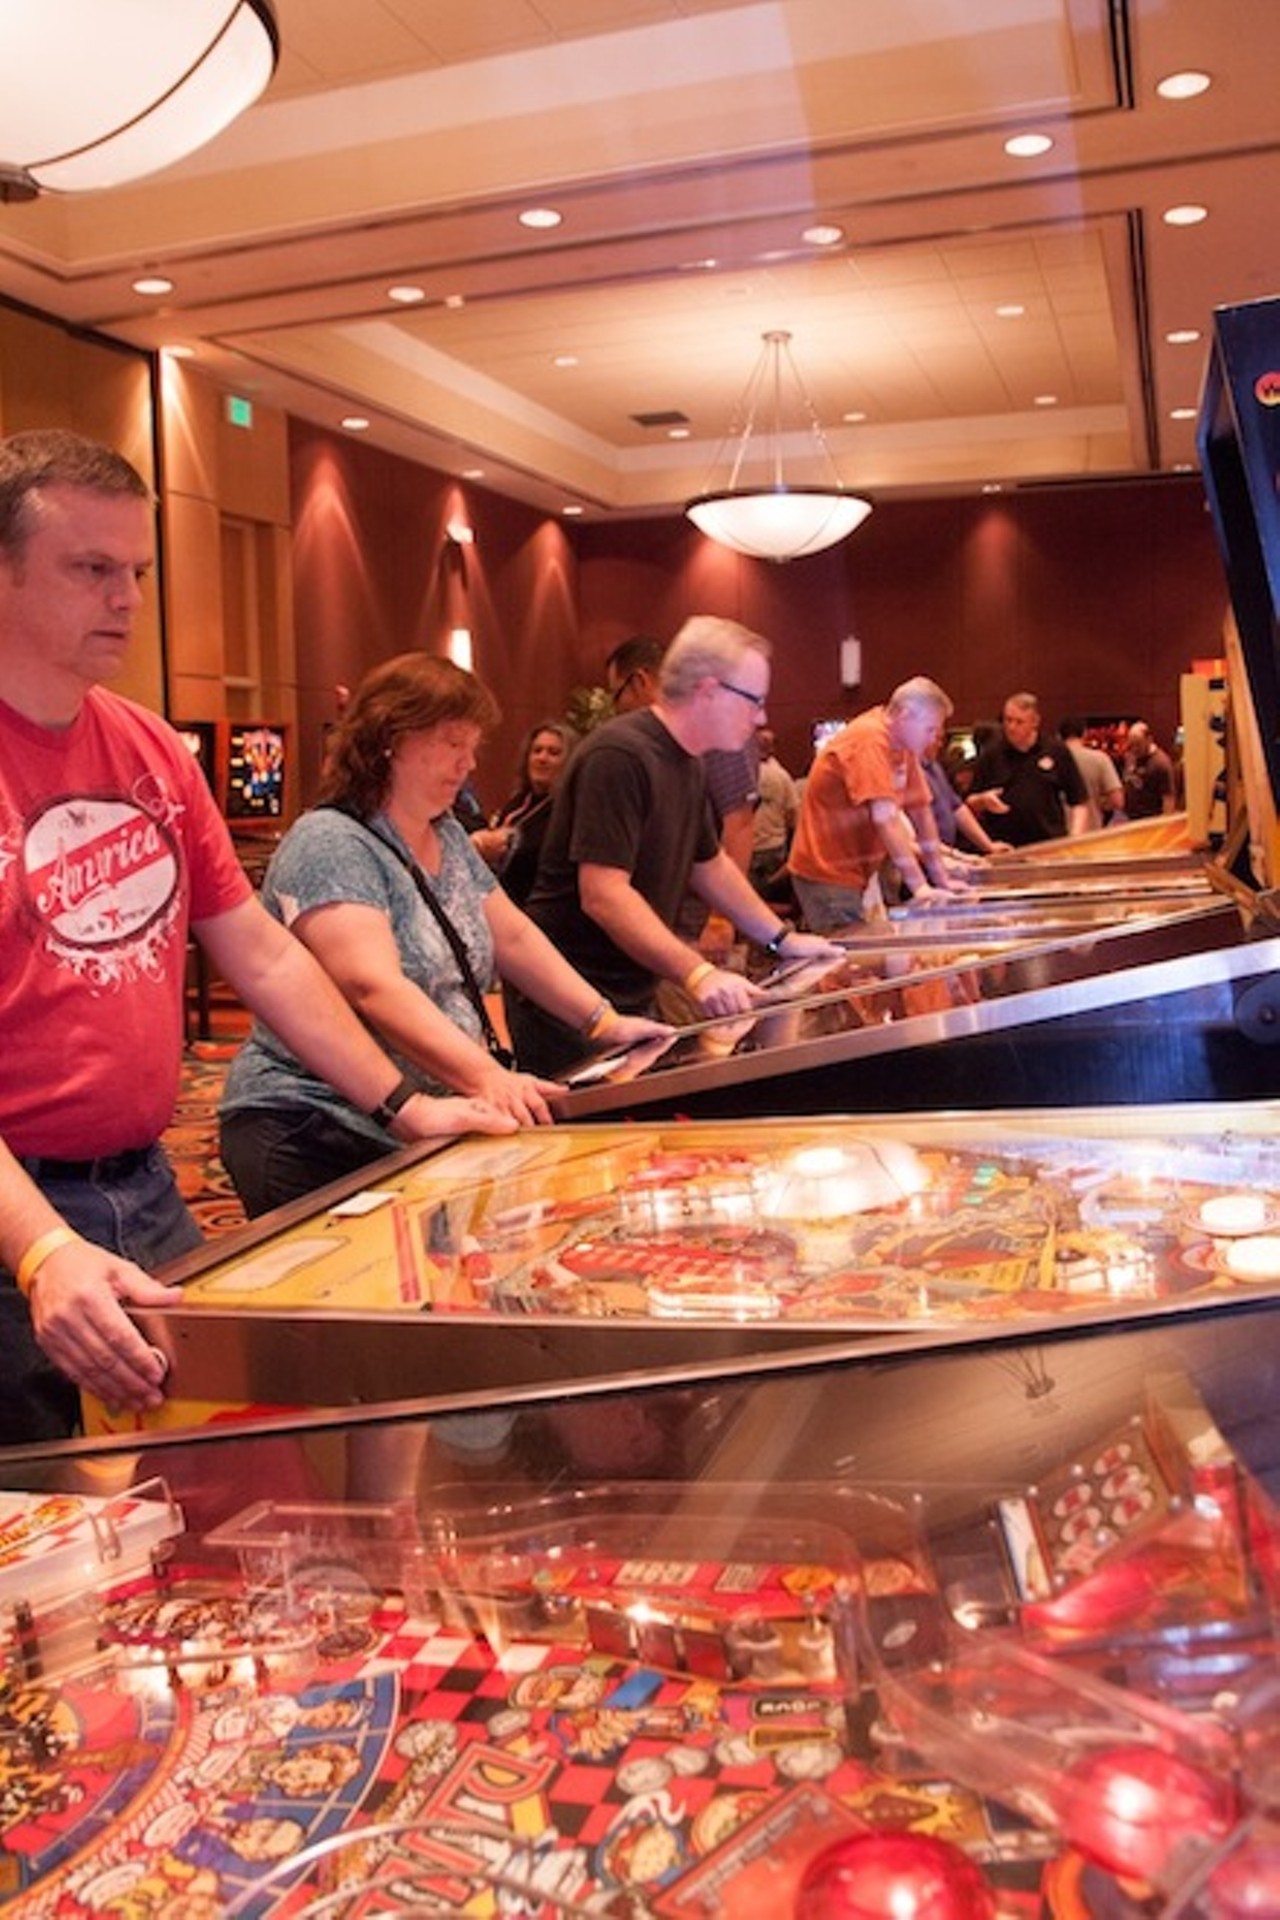 Southern Pinball Festival
Friday-Sunday, Nov. 22-24
3 p.m-midnight Friday, 10 a.m.-midnight Saturday, 10 a.m.-5 p.m. Sunday
Crowne Plaza Orlando Universal, 7800 Universal Blvd.
southernpinballfestival.net
$20-$70
Whether you&#146;re a beginning pinball pupil just getting a feel for the flippers or a full-fledged wizard whose skills evoke the classic Who song, this fest has something for everybody. The third annual (and three-day) Southern Pinball Festival, held at the Crowne Plaza Universal, features an assortment of classic and modern machines, while offering both open free play and an International Flipper Pinball Association-sanctioned tournament throughout the weekend. Tournament winners can look forward to up to $2,000 in prize money and points in the World Pinball Player Rankings, so if you&#146;re in it to win it, be sure and check out the event website for tourney rules and registration info. And if you&#146;re the type who wants to share your old-school games from home, feel free; anyone who brings in a game receives one free weekend pass to the festival. &#150; James Austin